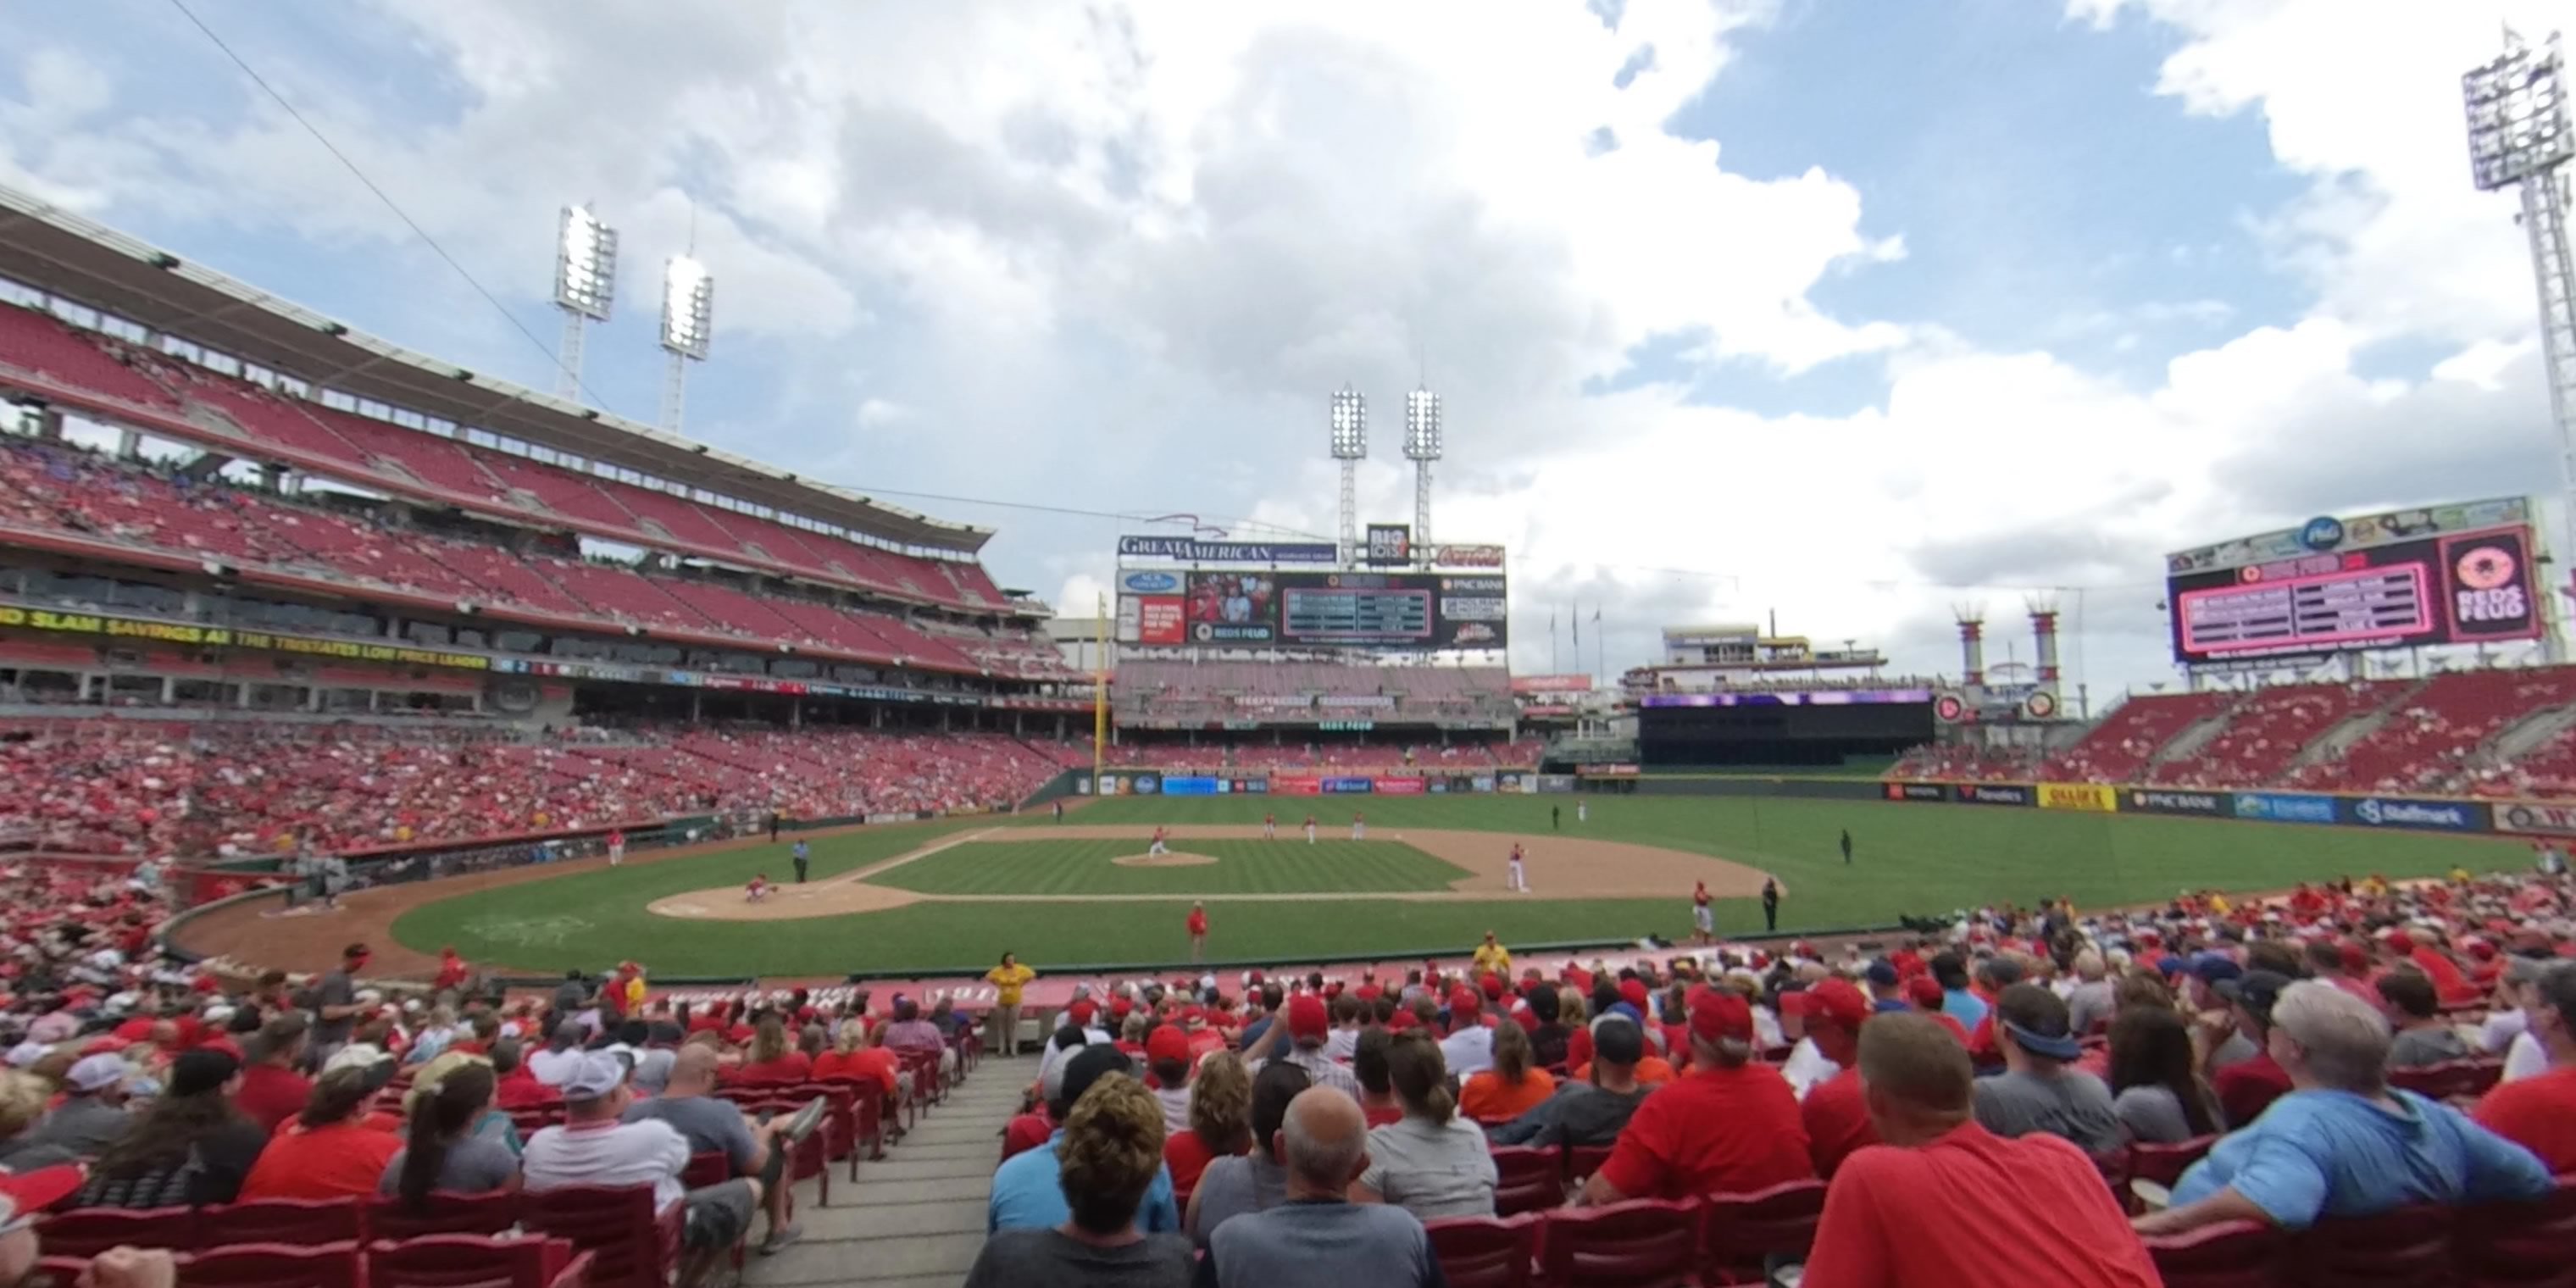 section 128 panoramic seat view  for baseball - great american ball park